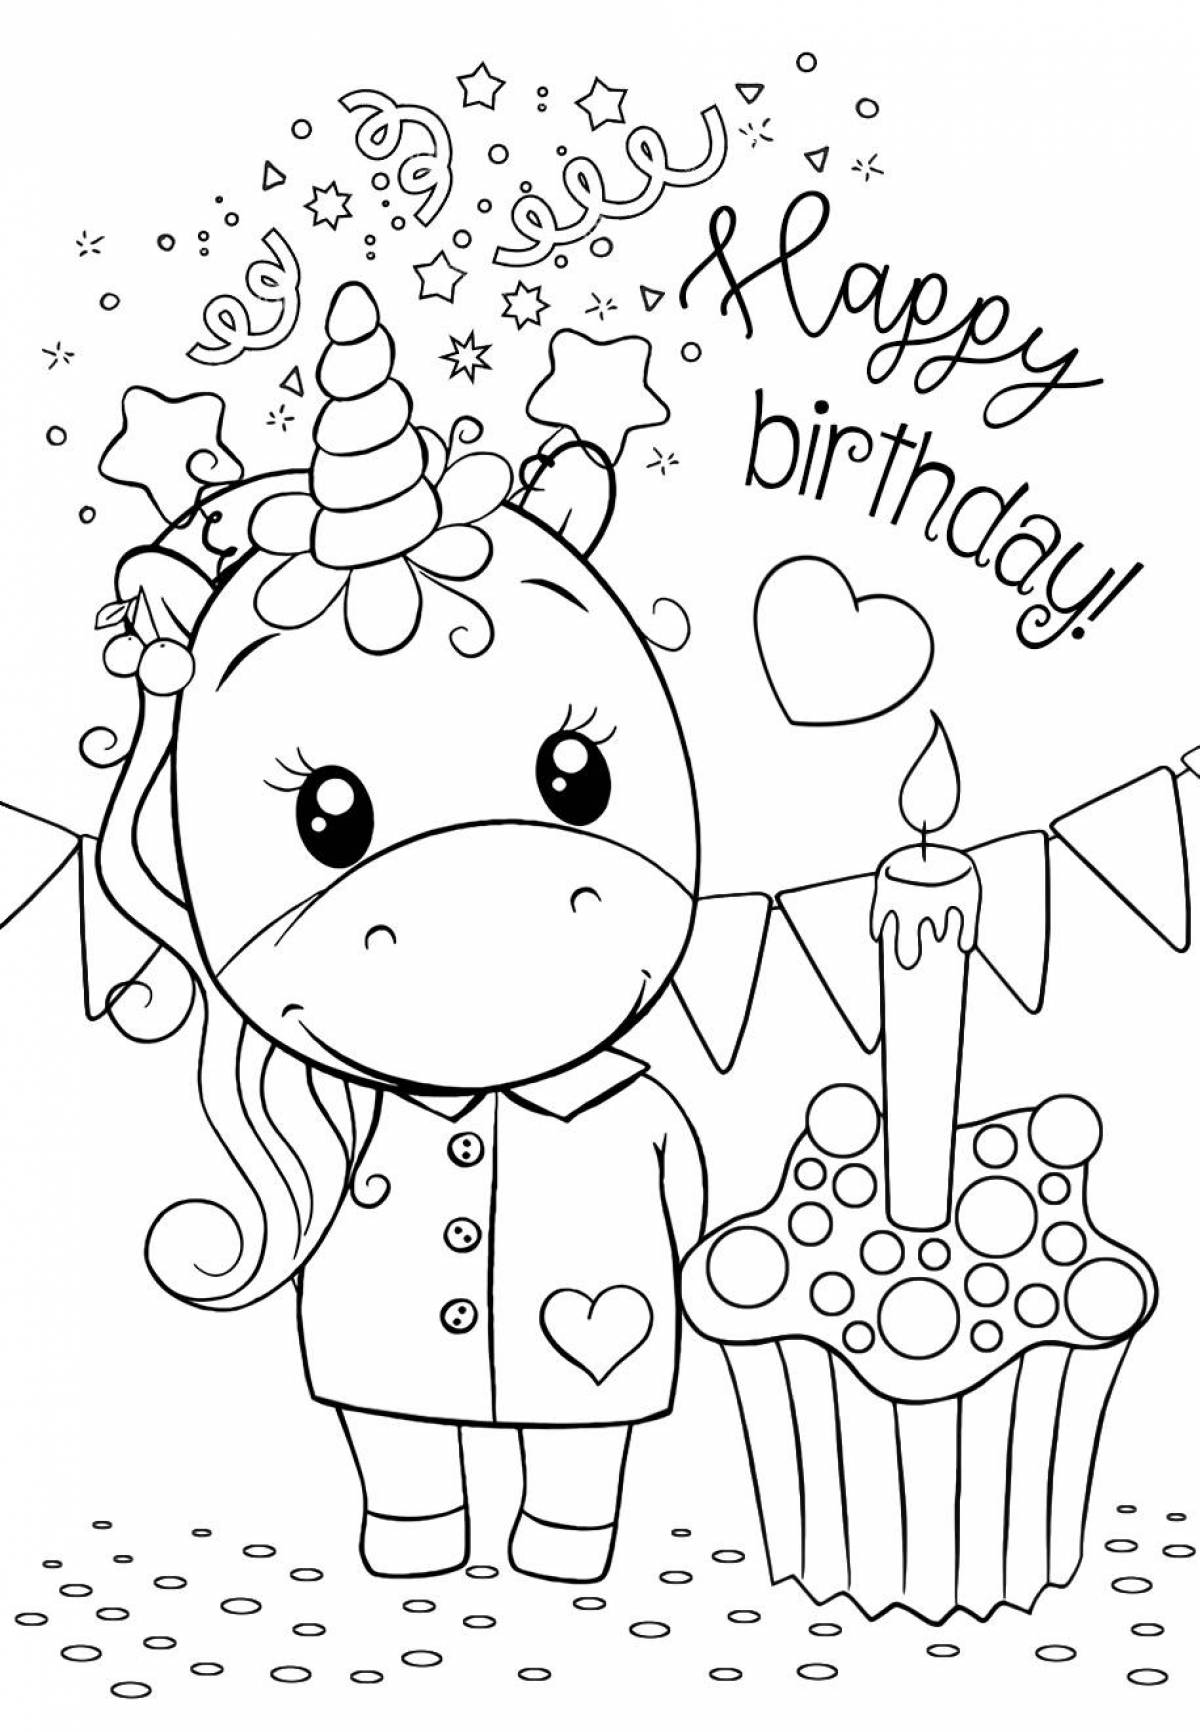 Happy birthday card for kids #9